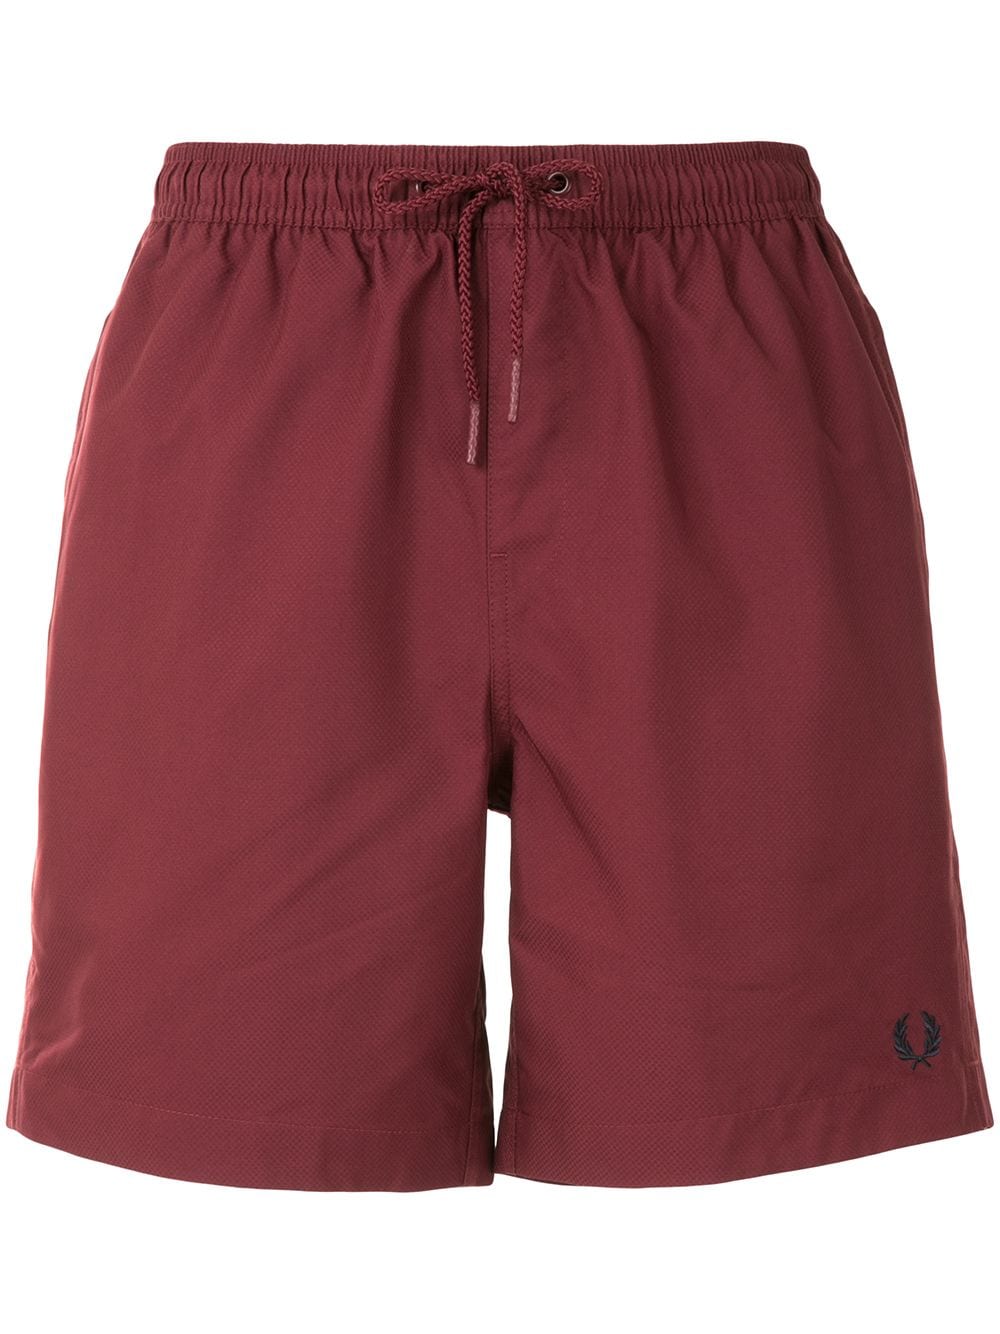 Fred Perry Ανδρικό Μαγιό Textured Swimshort S8506122 Porto